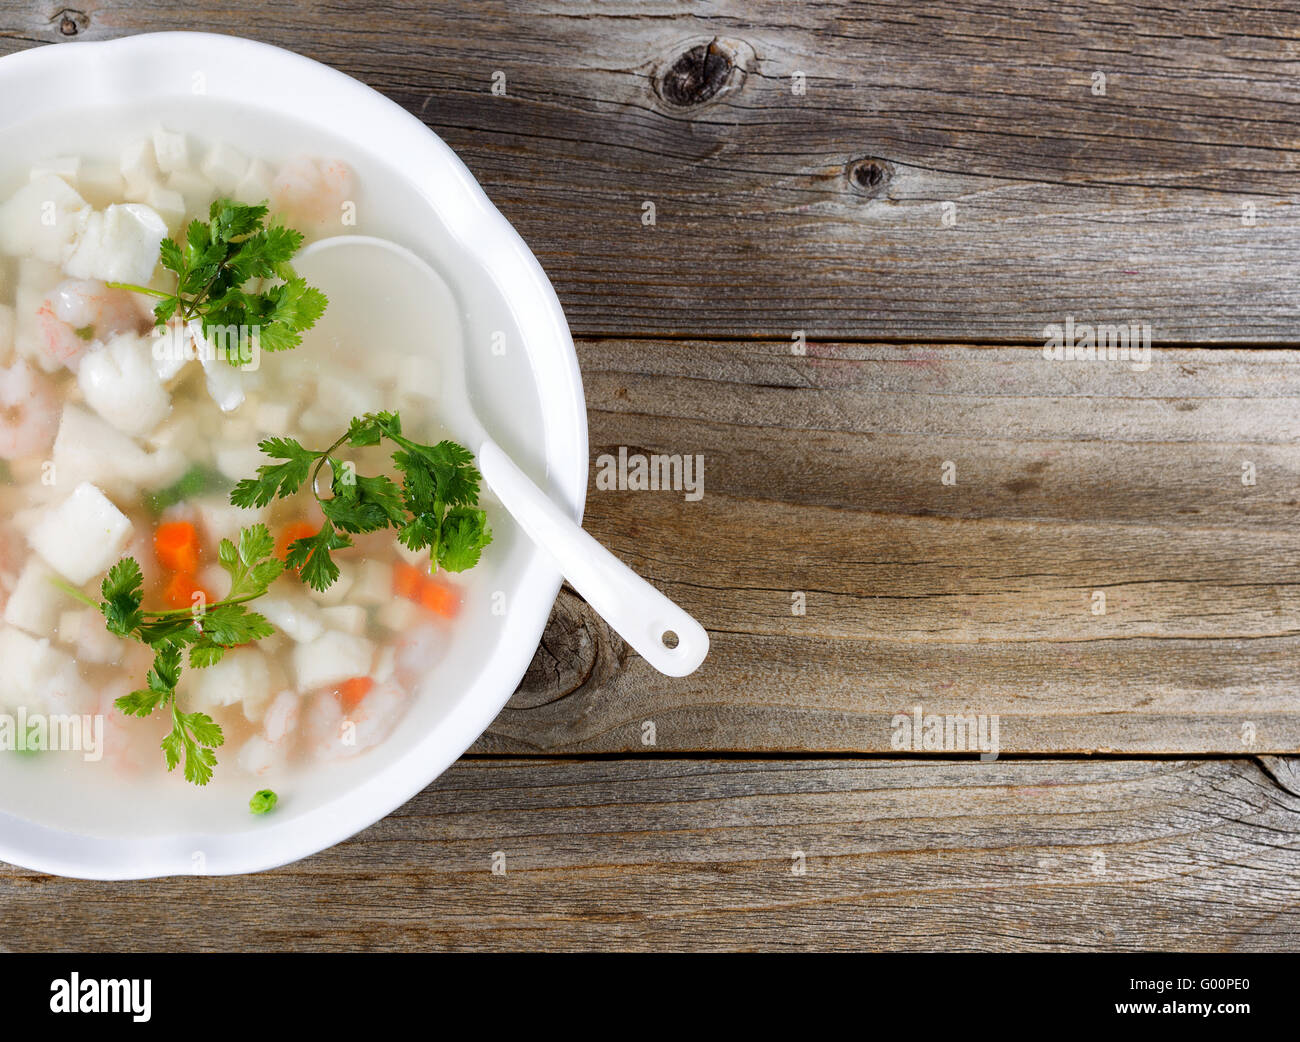 Fresh seafood soup dish ready to eat Stock Photo